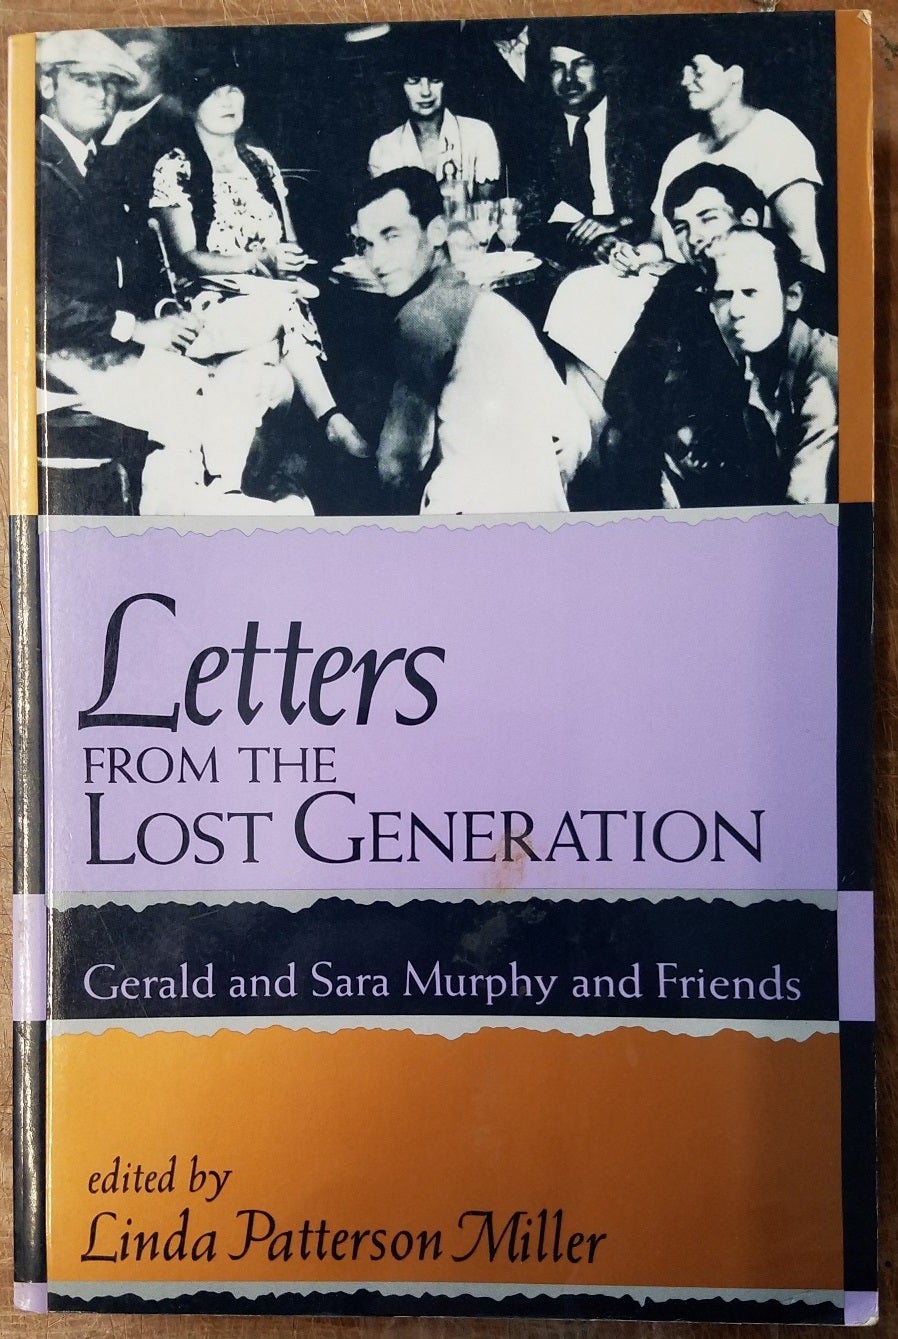 tavle forfader Metropolitan Letters from the Lost Generation: Gerald and Sara Murphy and Friends |  Linda Patterson Miller | 2nd printing